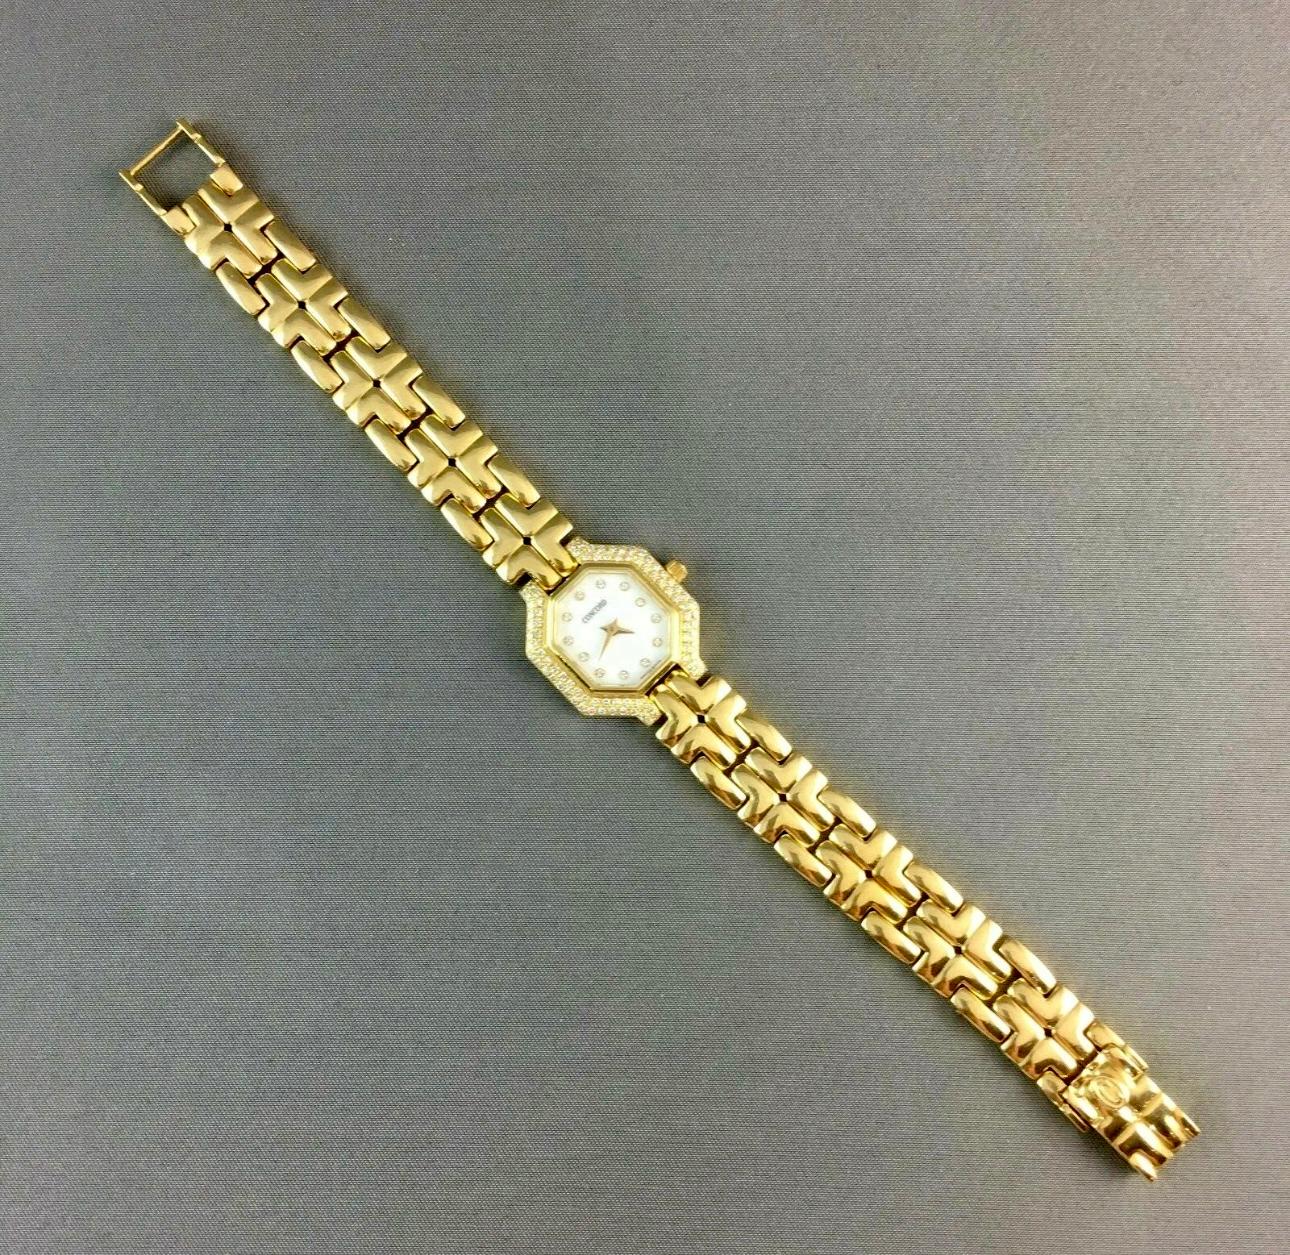 Concord 18k Gold & Diamond Ladies Watch Ref. #51.25.160, Mother of Pearl Dial In Excellent Condition For Sale In Laguna Beach, CA